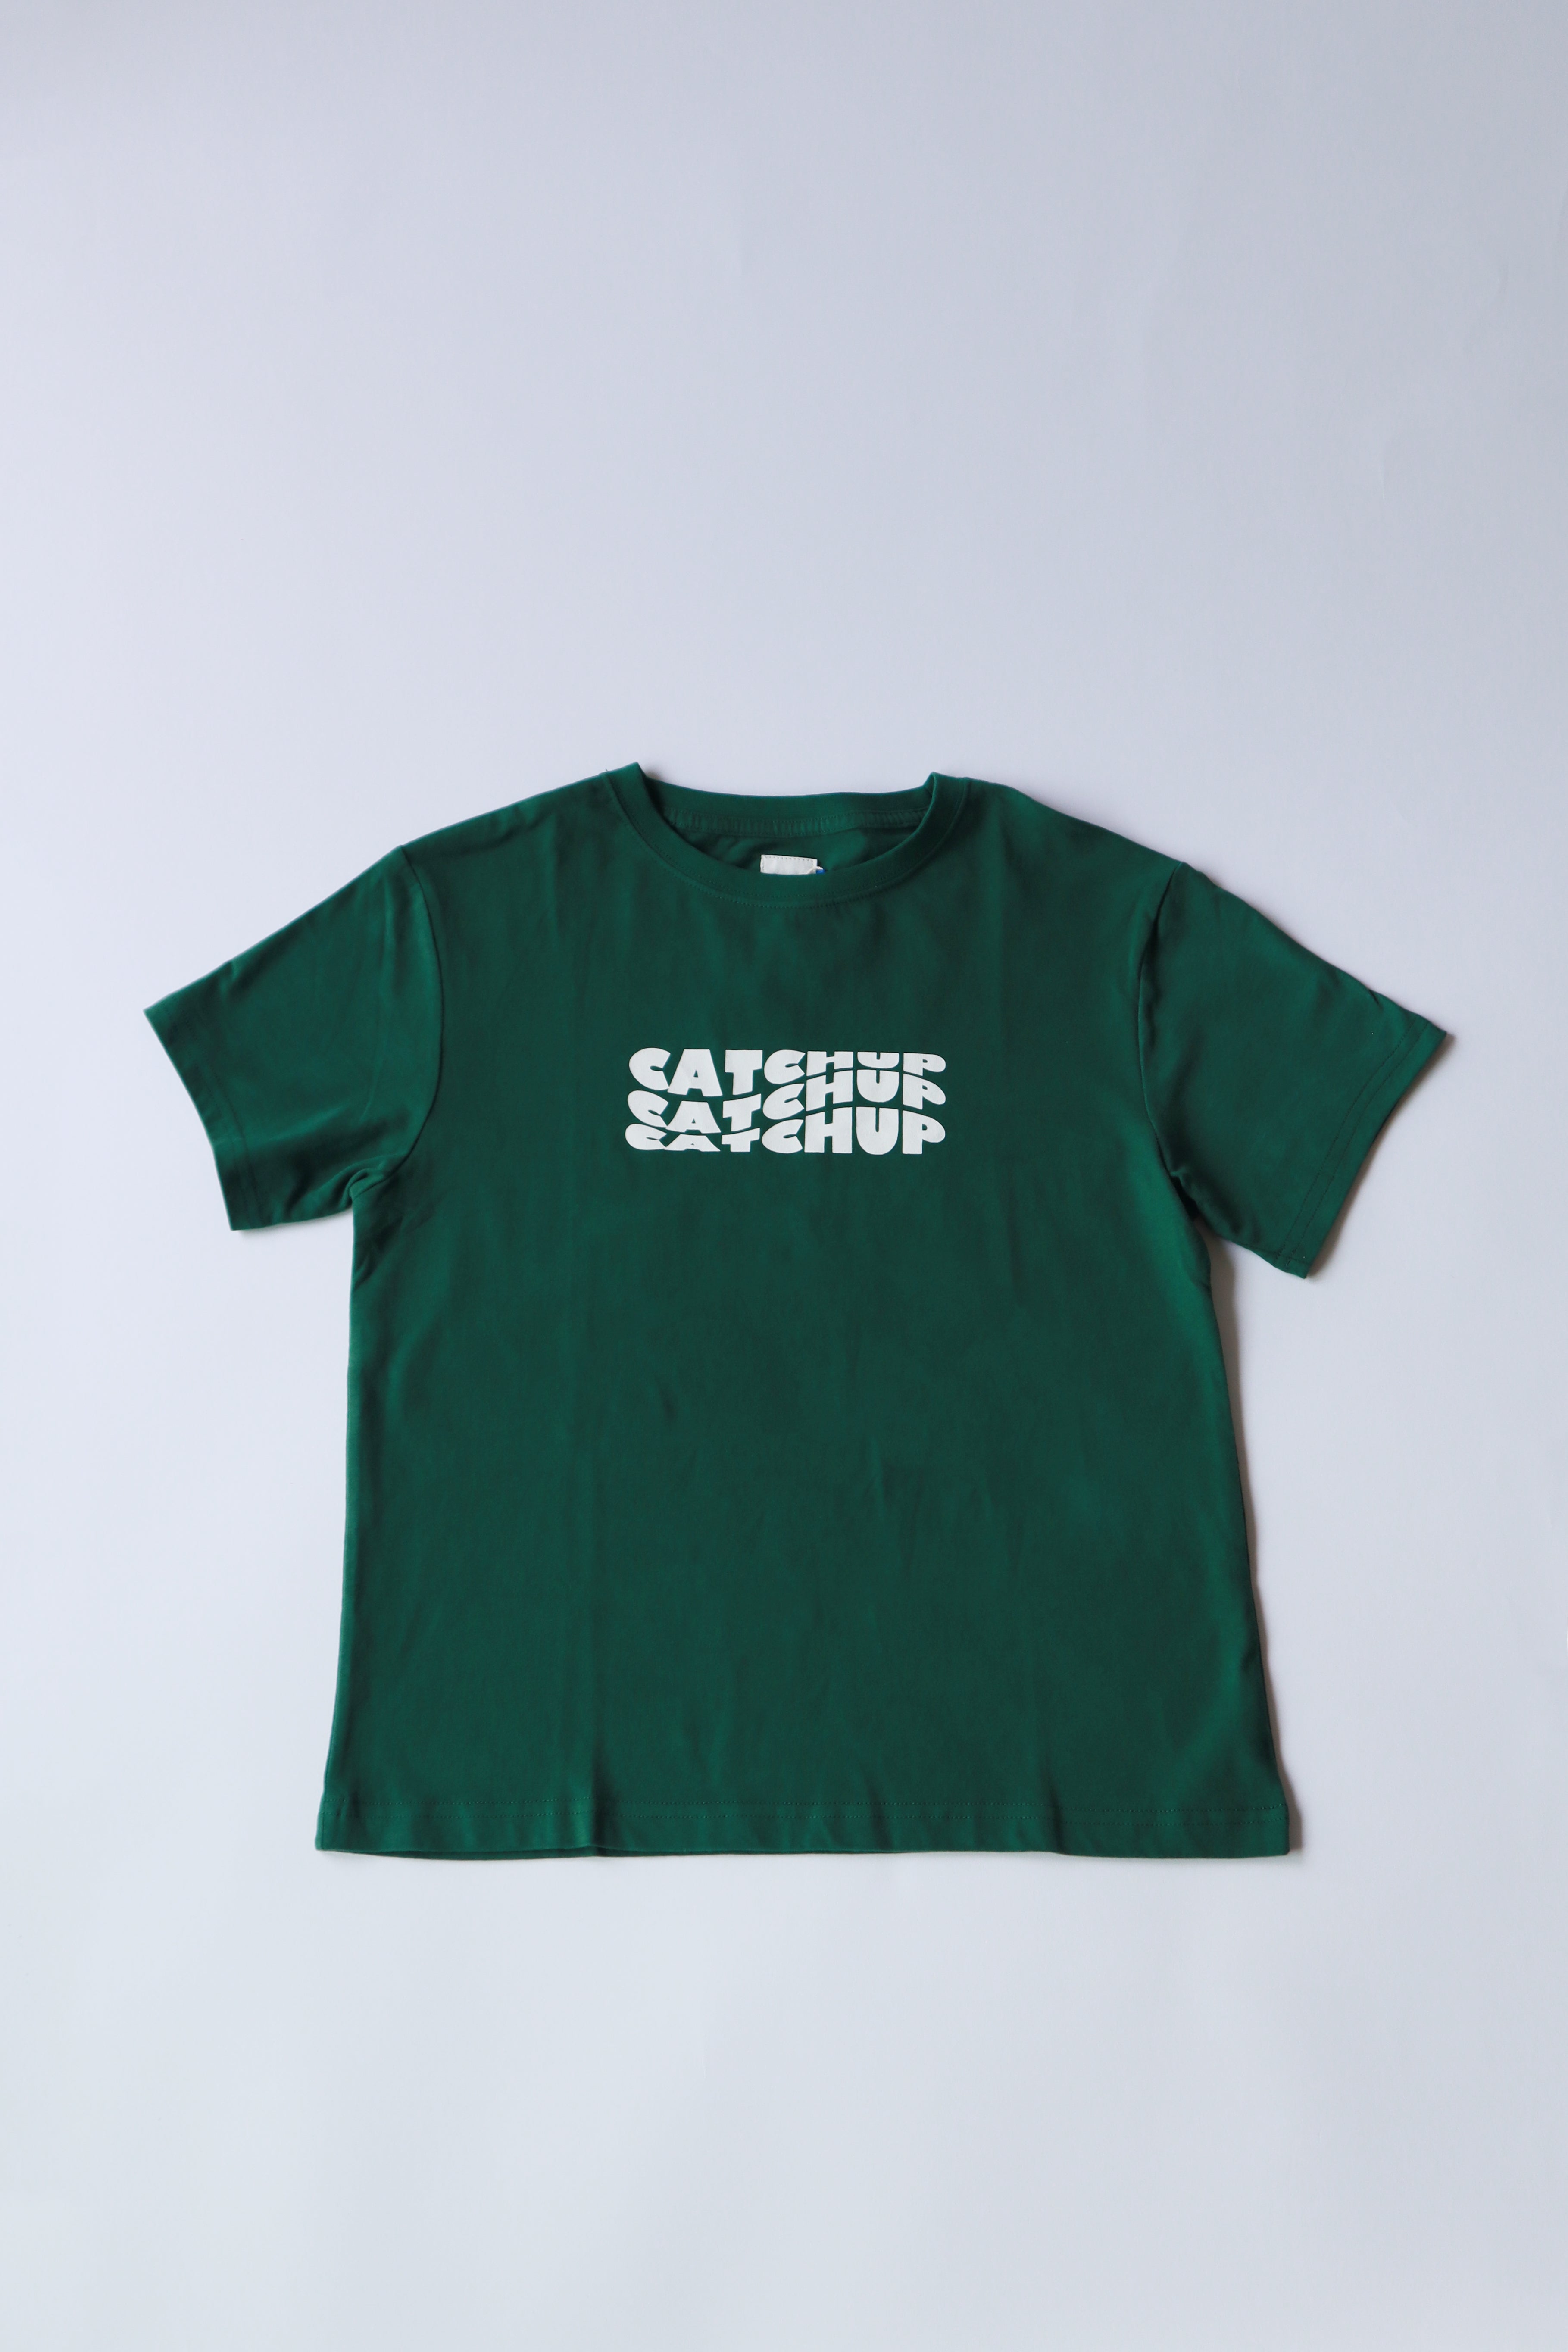 【Catchup】CatchupプリントTシャツ